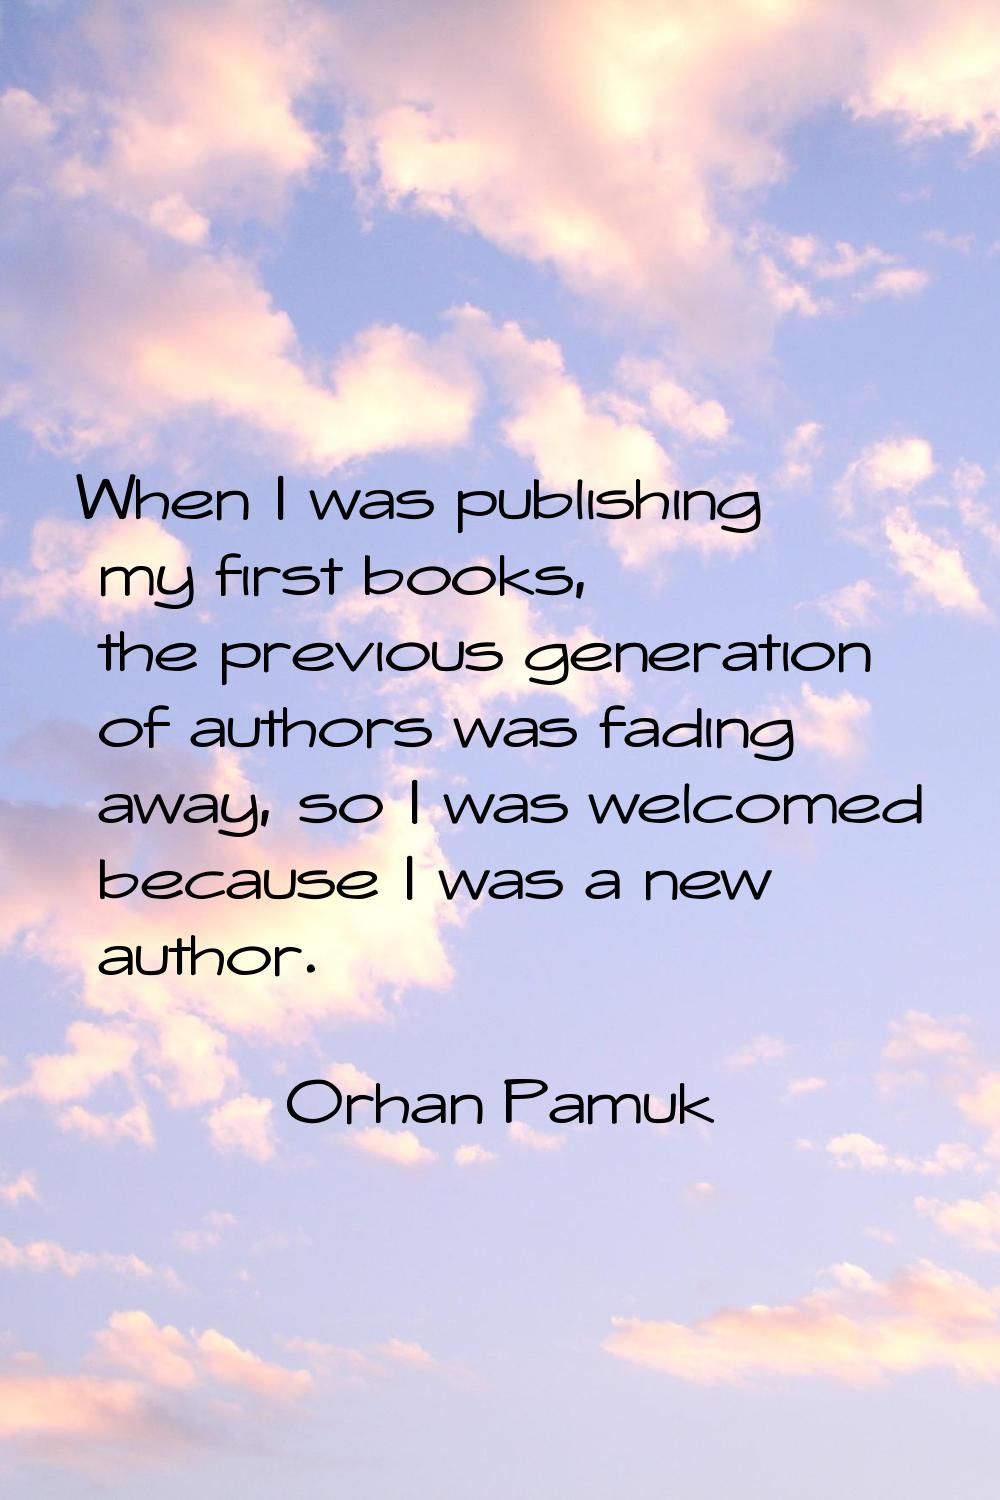 When I was publishing my first books, the previous generation of authors was fading away, so I was 